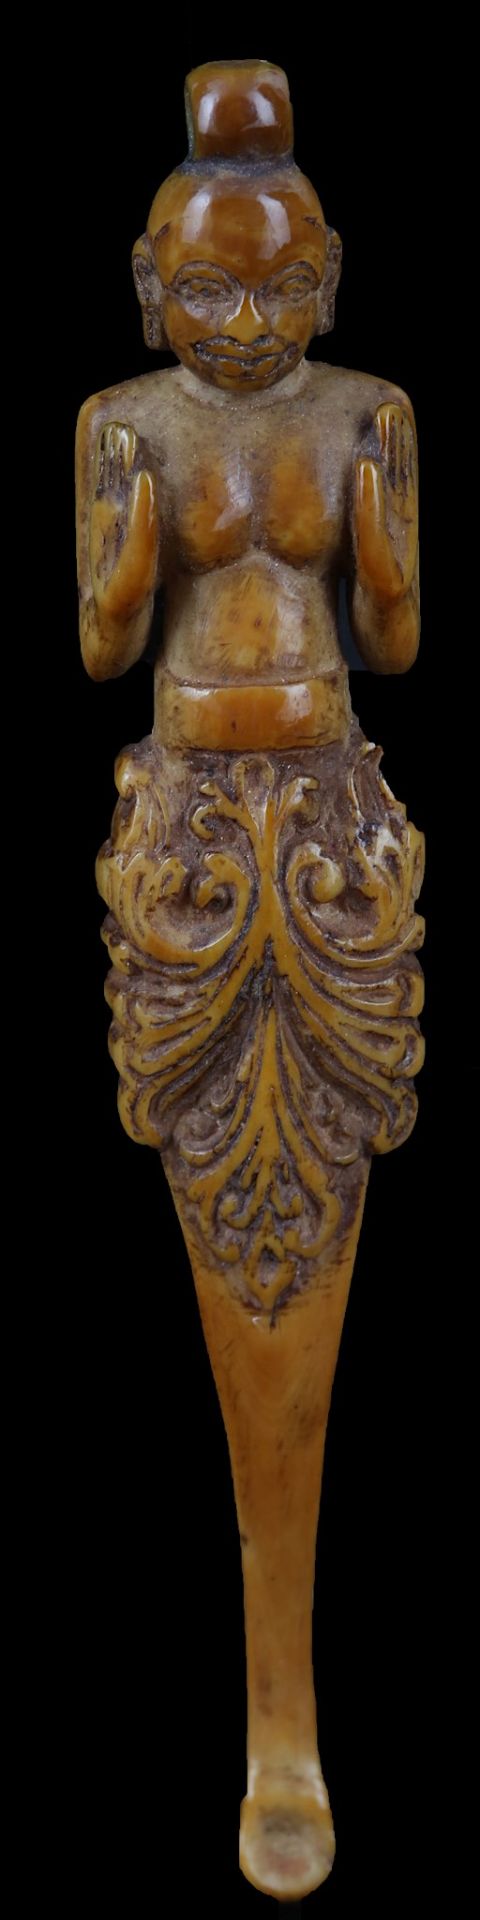 A MISCELLANEOUS GROUP OF SINHALESE IVORY CARVINGS - Image 3 of 4